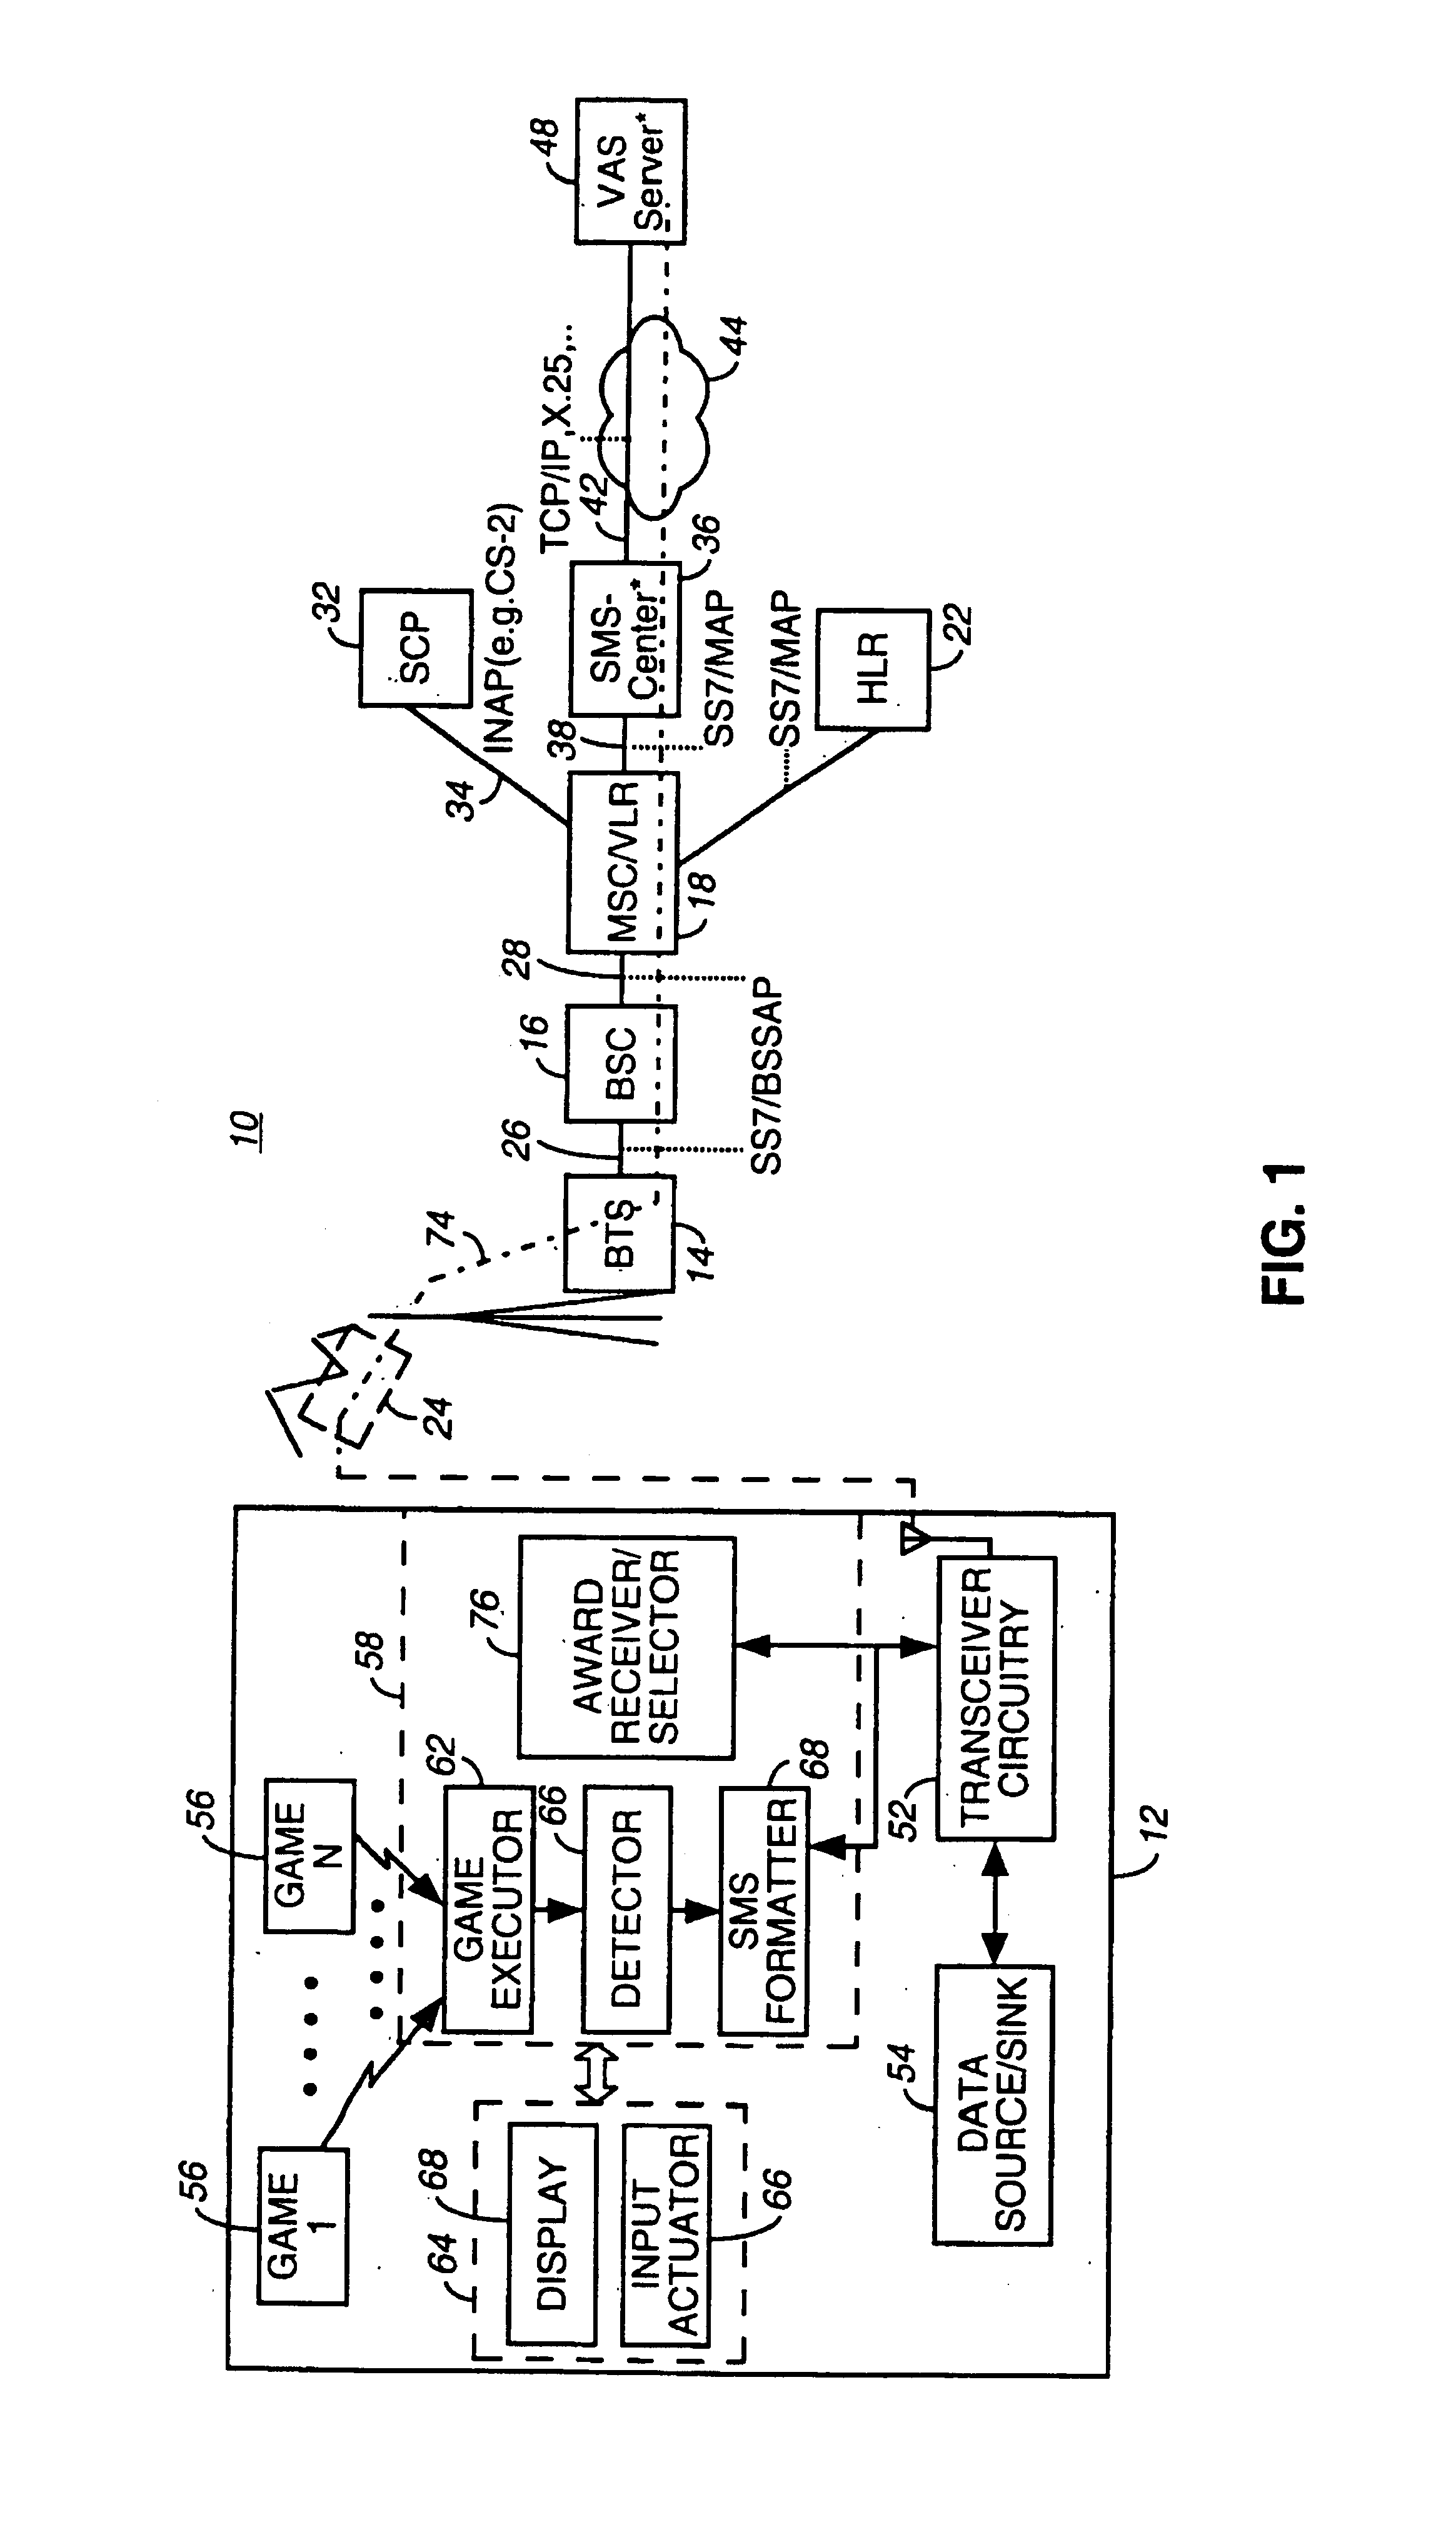 Reacreational reward-related apparatus, and associated method, for rewarding performance of execution of a recreation application at a mobile terminal